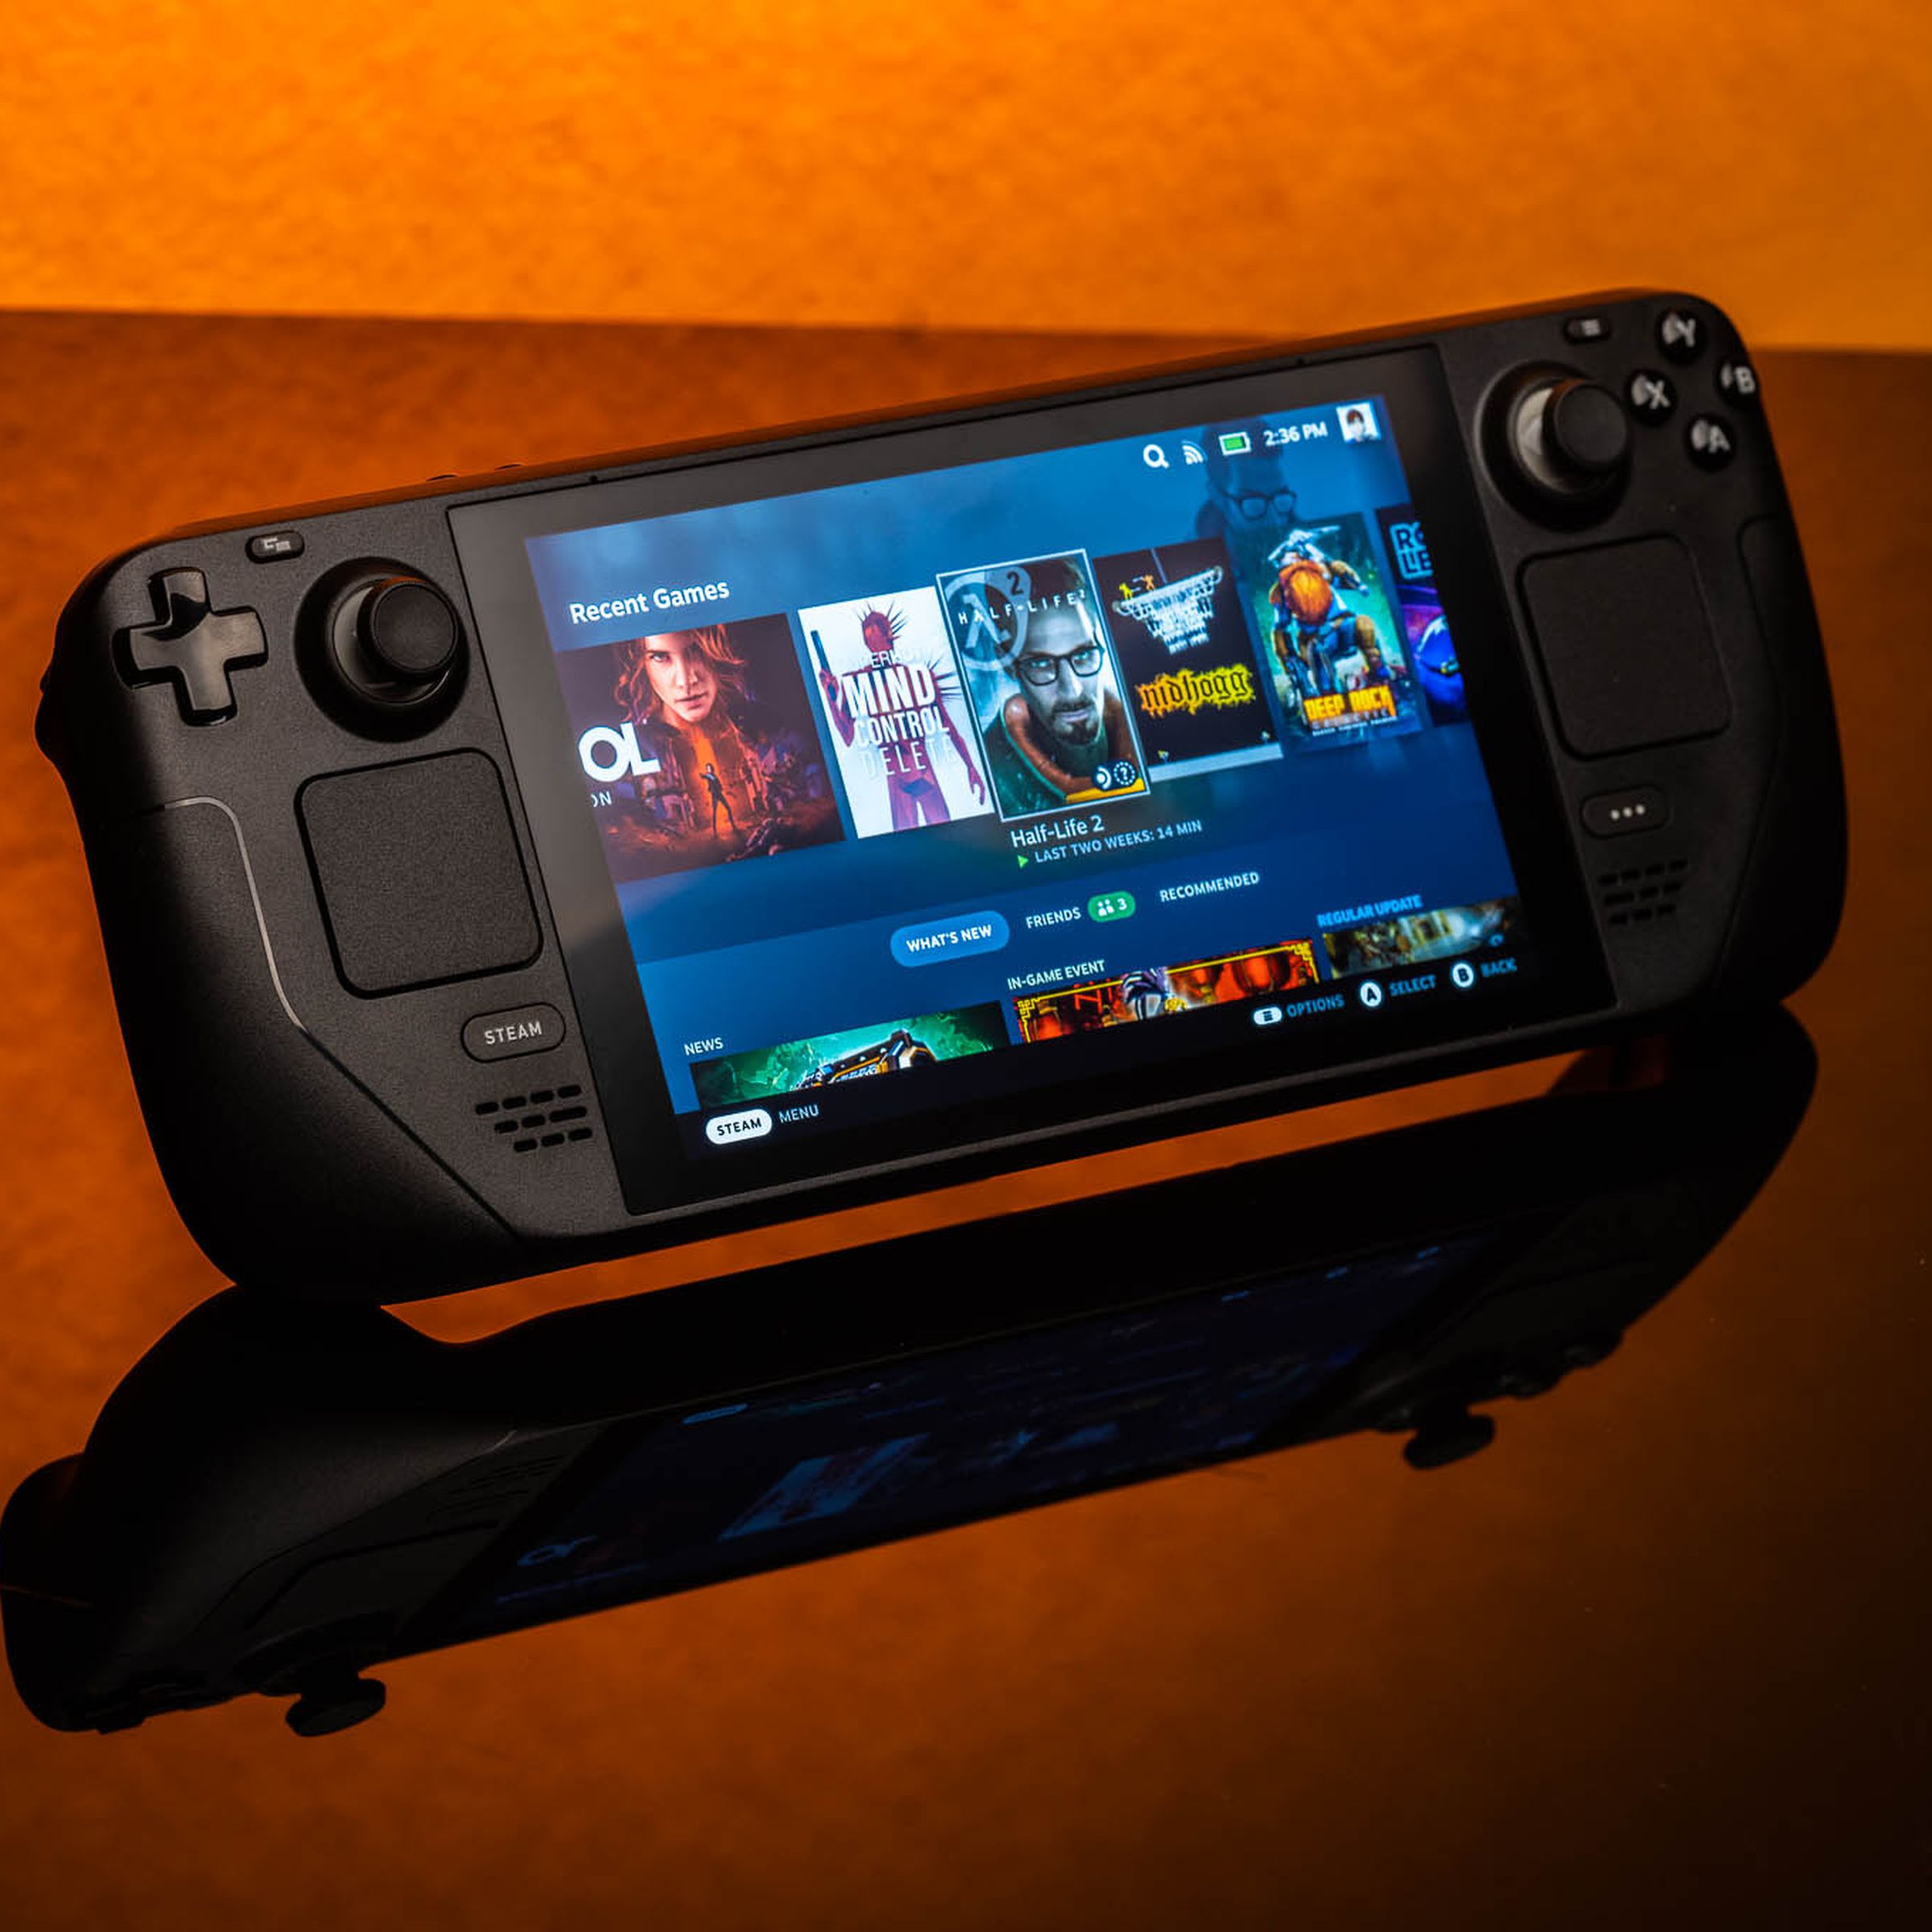 The Valve Steam Deck gaming handheld sits on a reflective table, with an orange background.